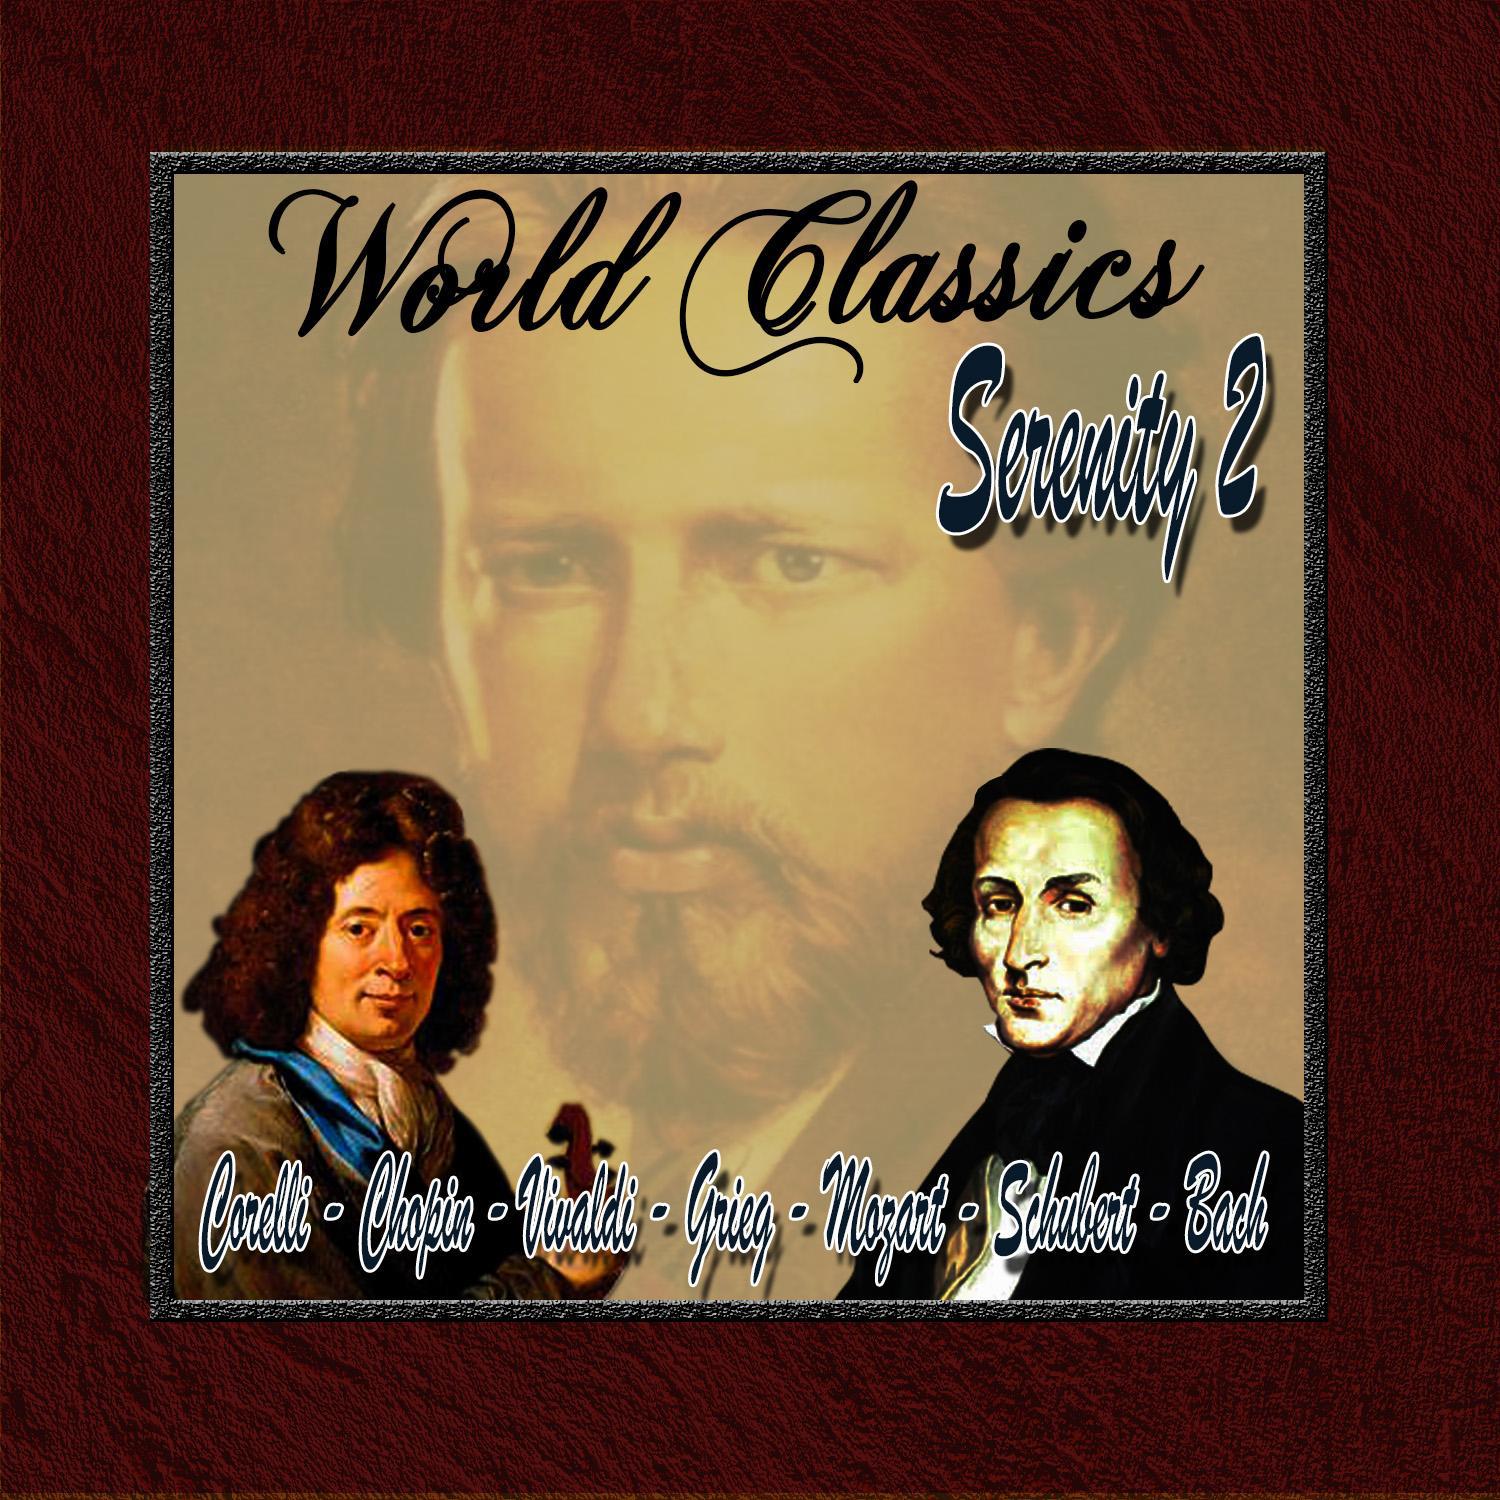 Peer Gyny Suite No.2, Op.55, No.4 Solveig's Song